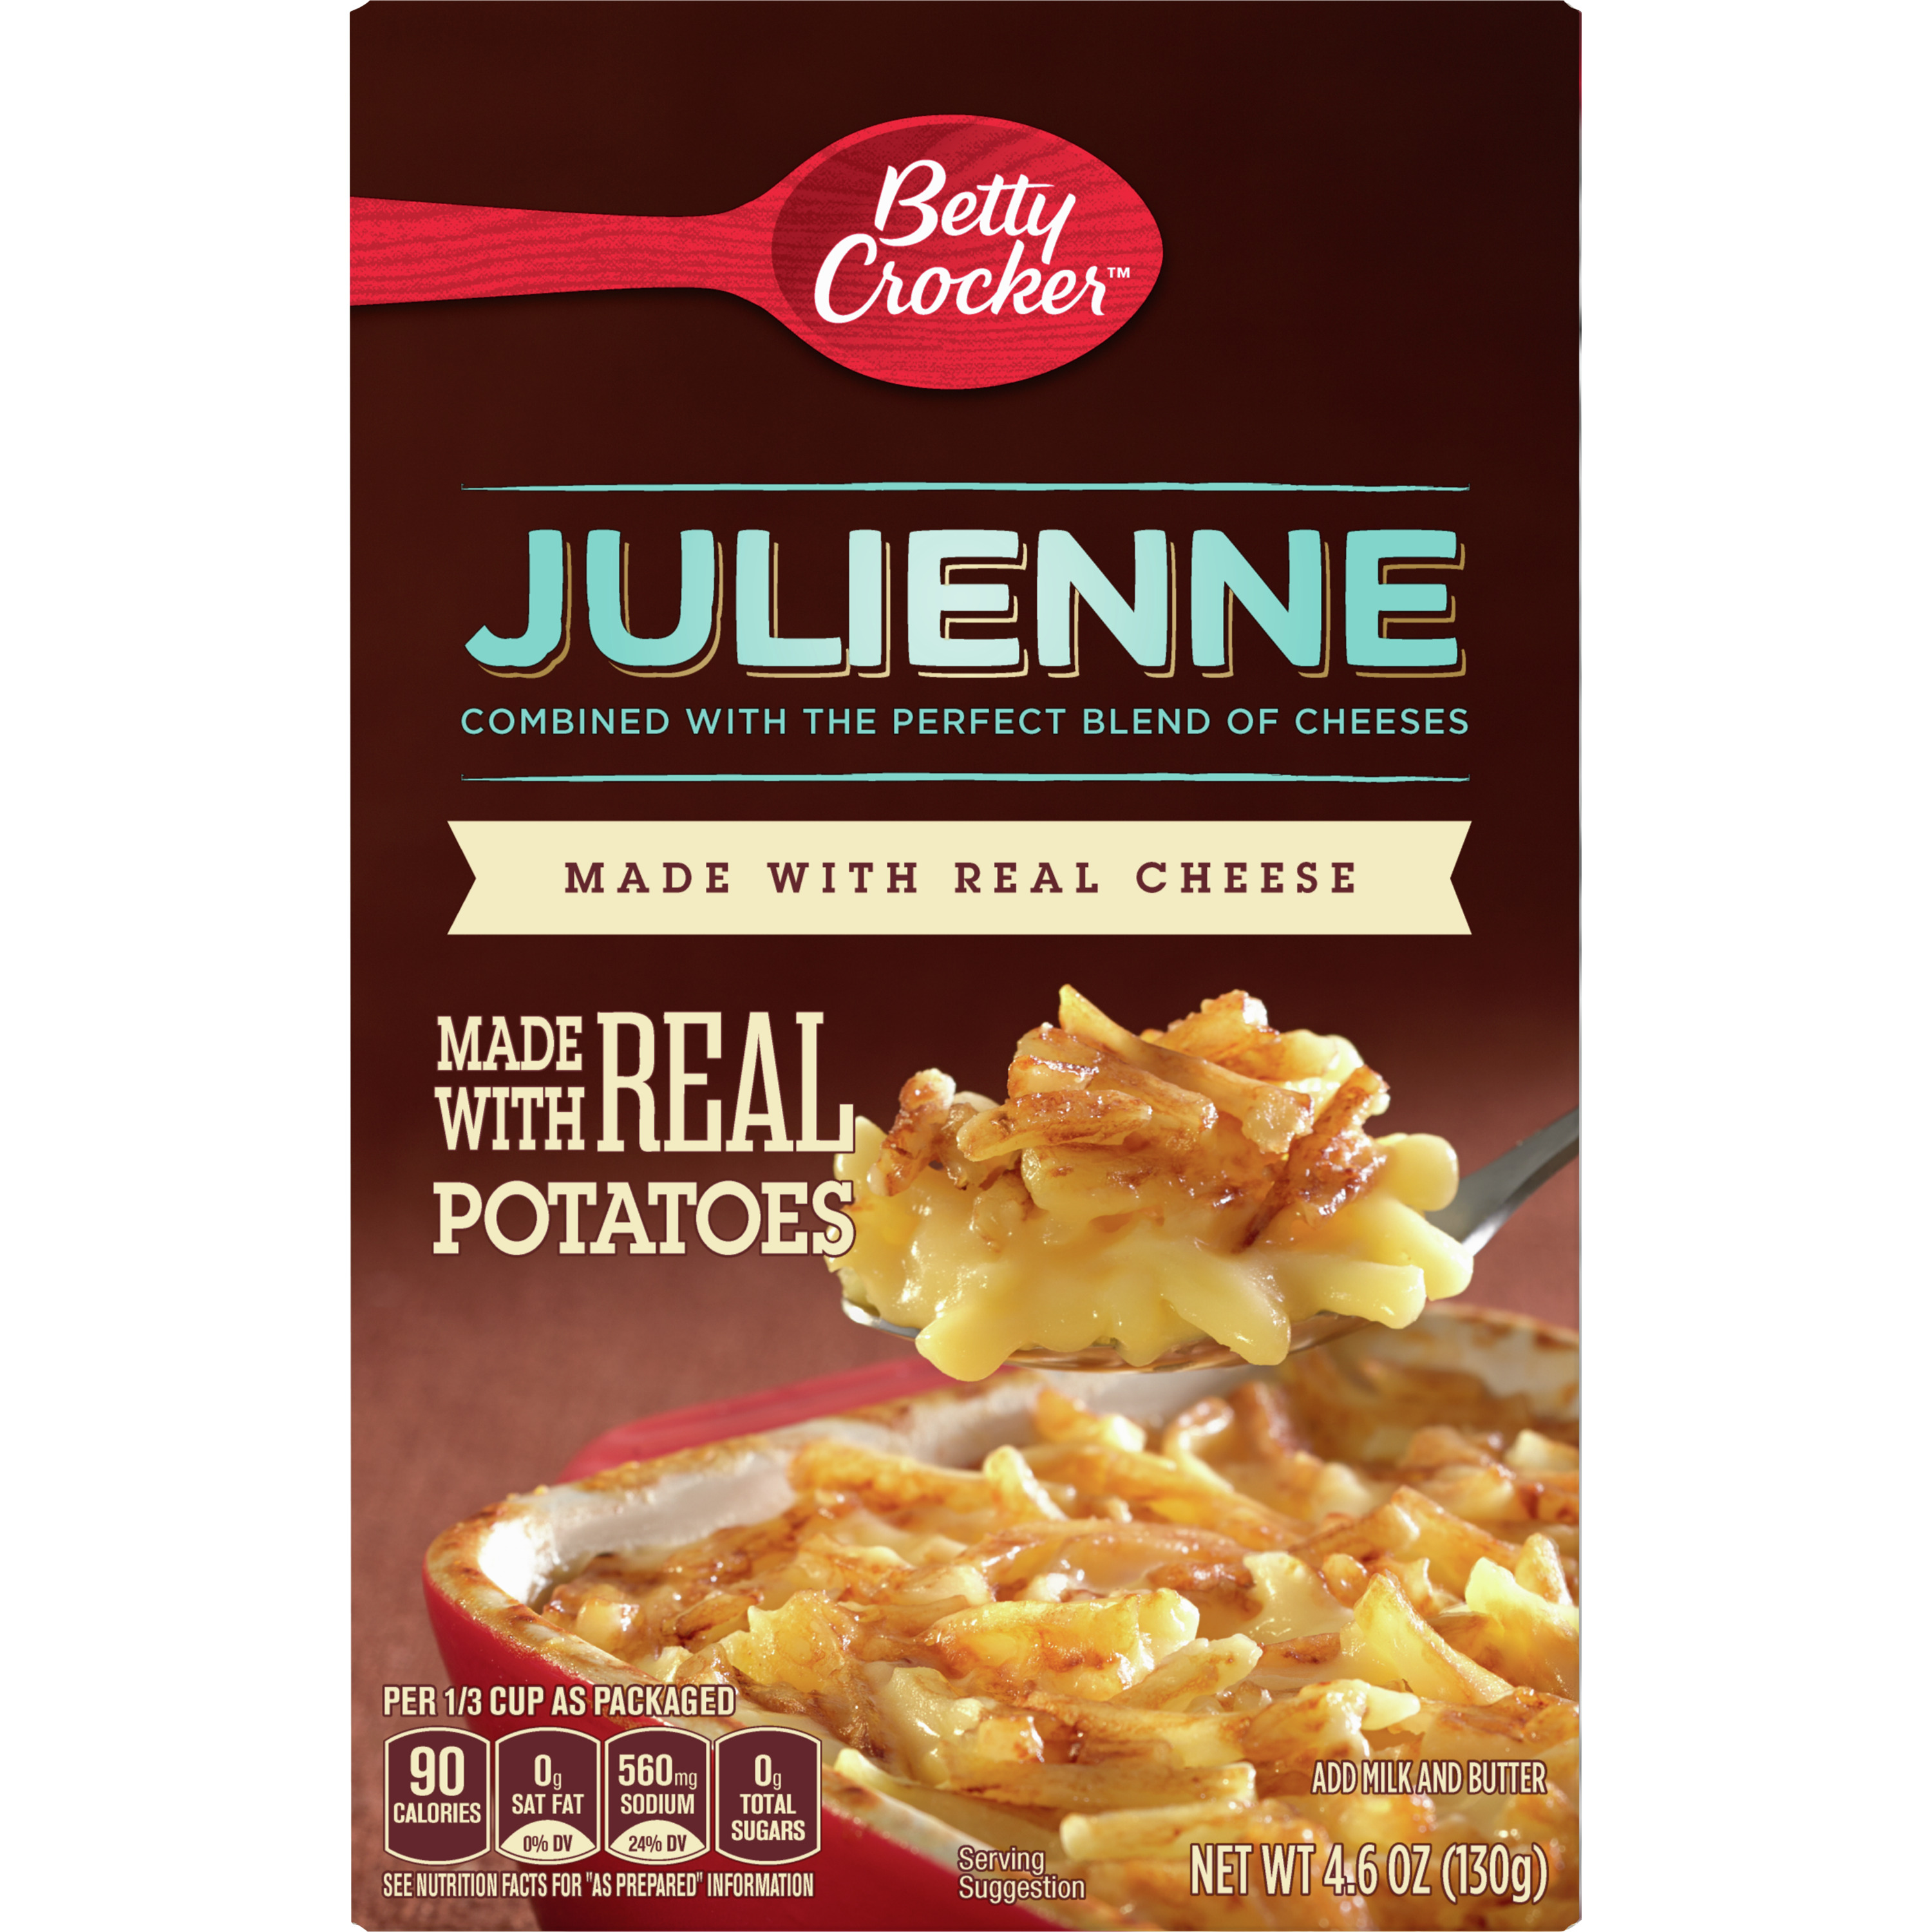 Betty Crocker Julienne Potatoes, Made with Real Cheese, 4.6 oz. - image 3 of 10